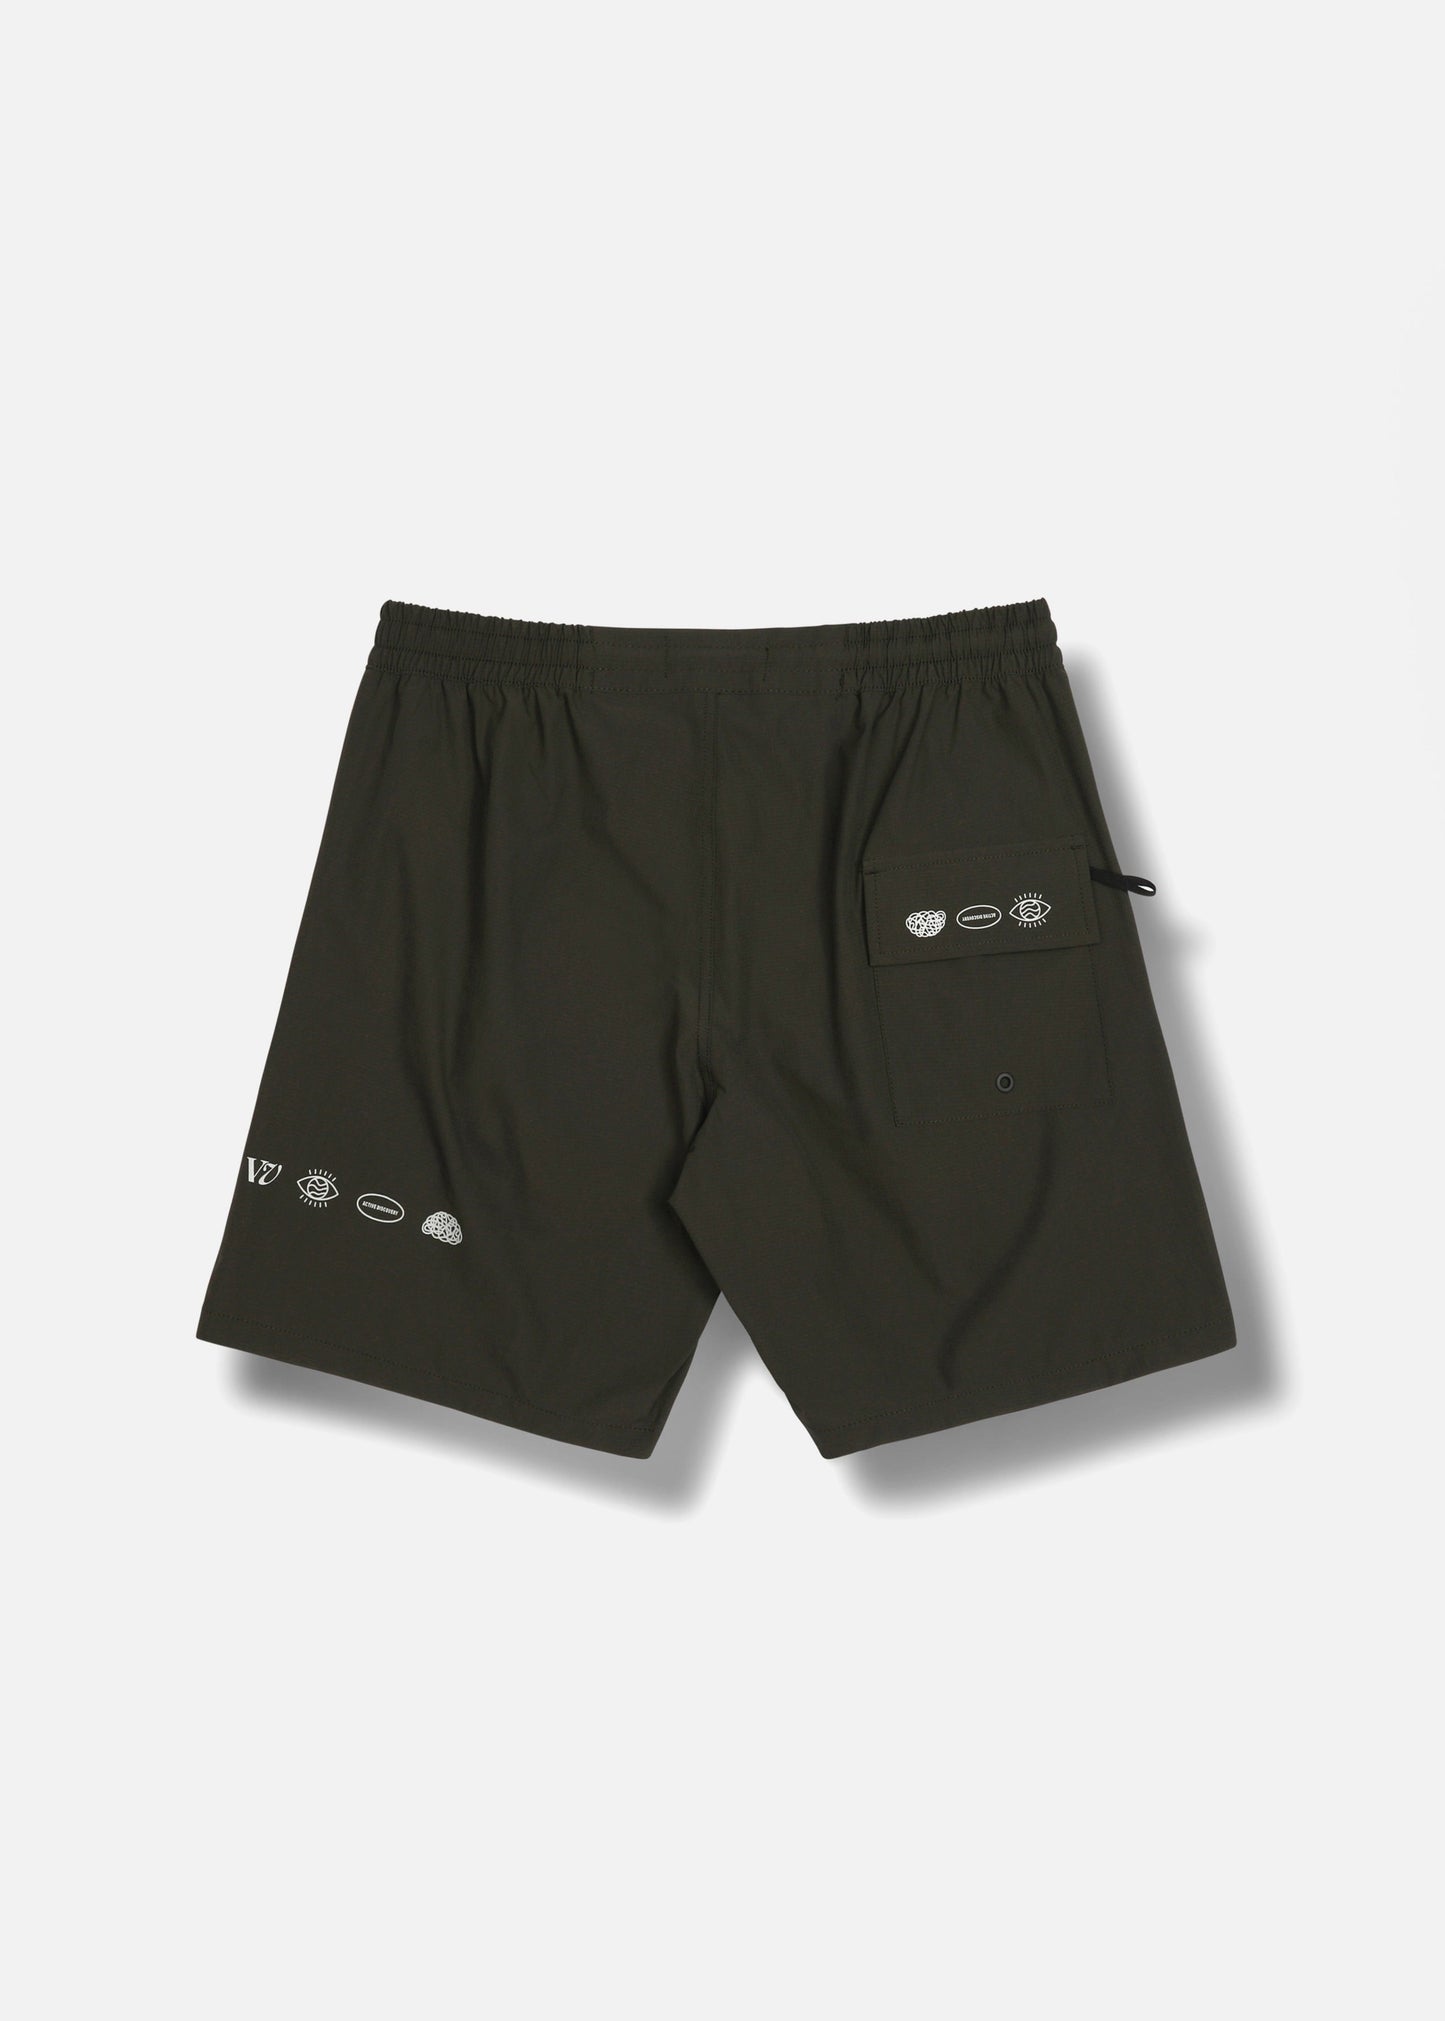 DAILY RIDE SHORT : ARMY